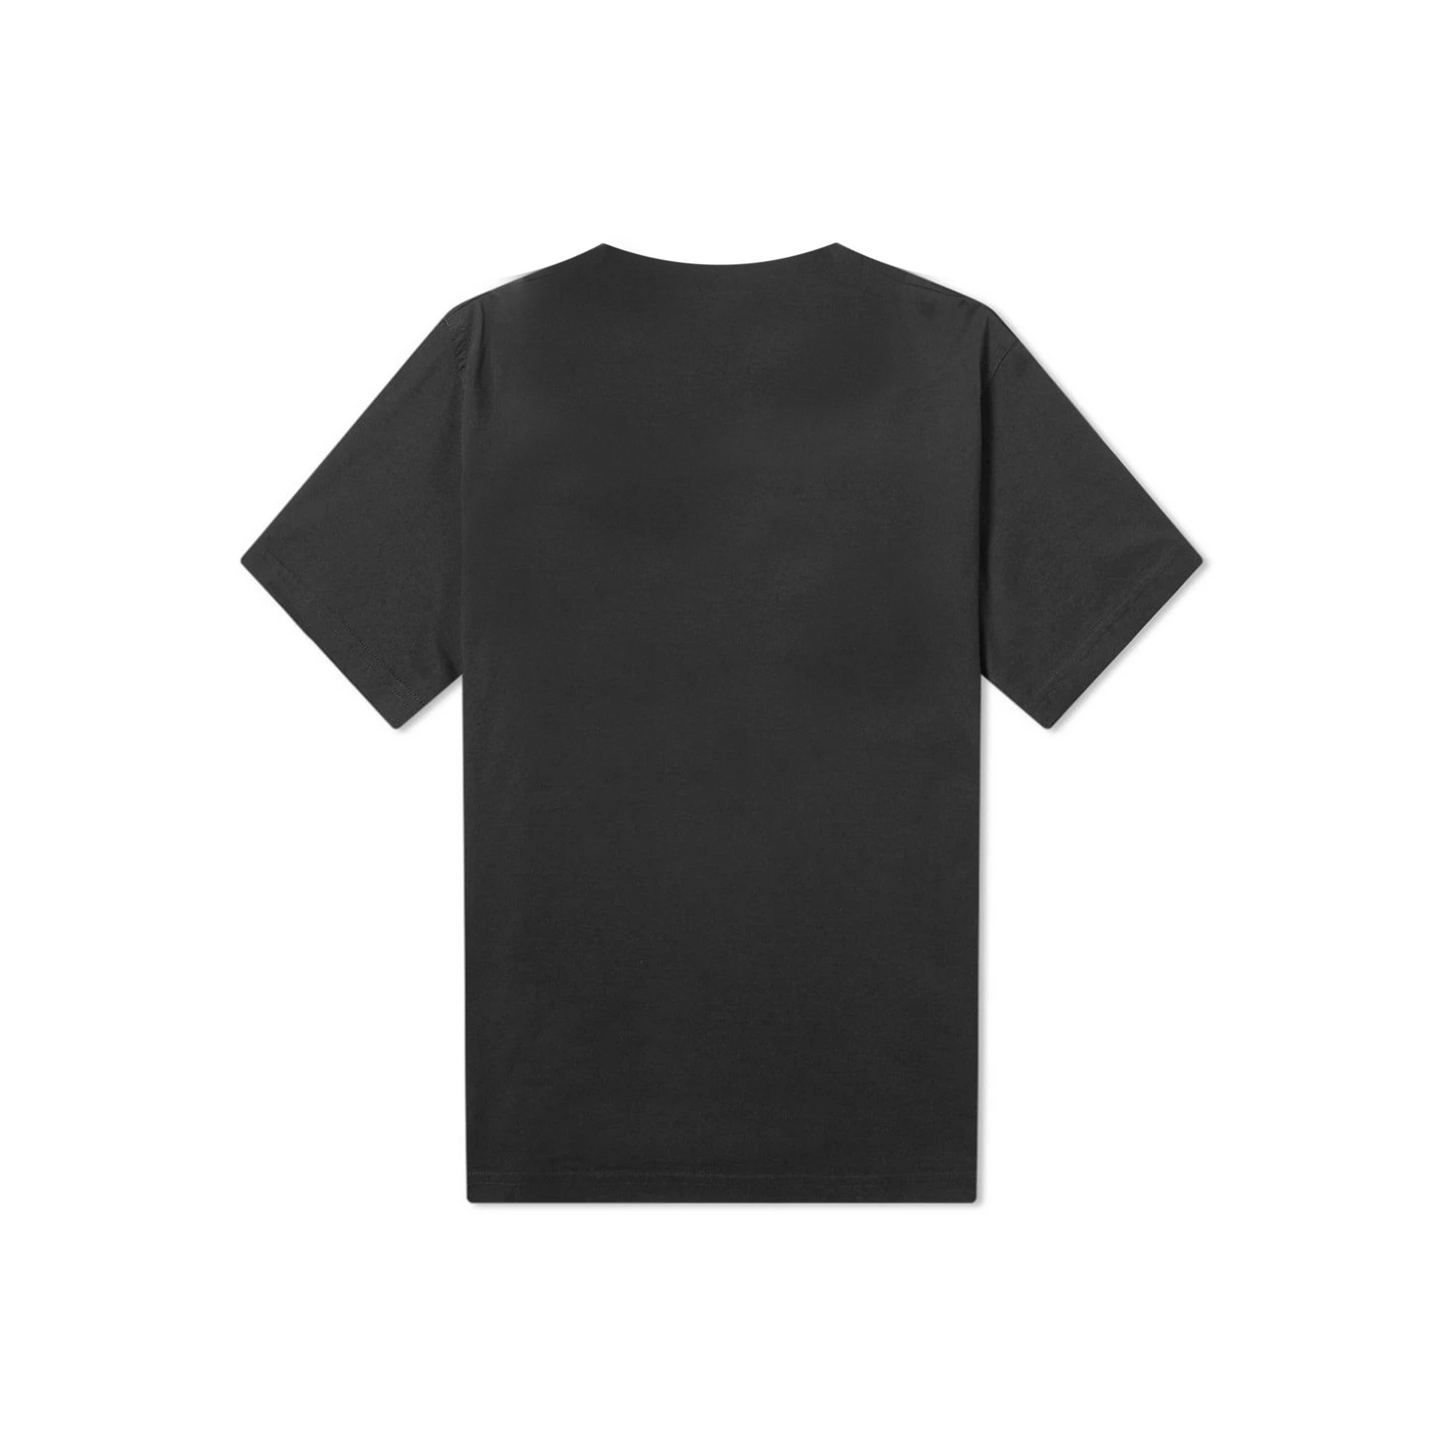 Givenchy Signature Logo Tee Black/Red (Regular Fit)